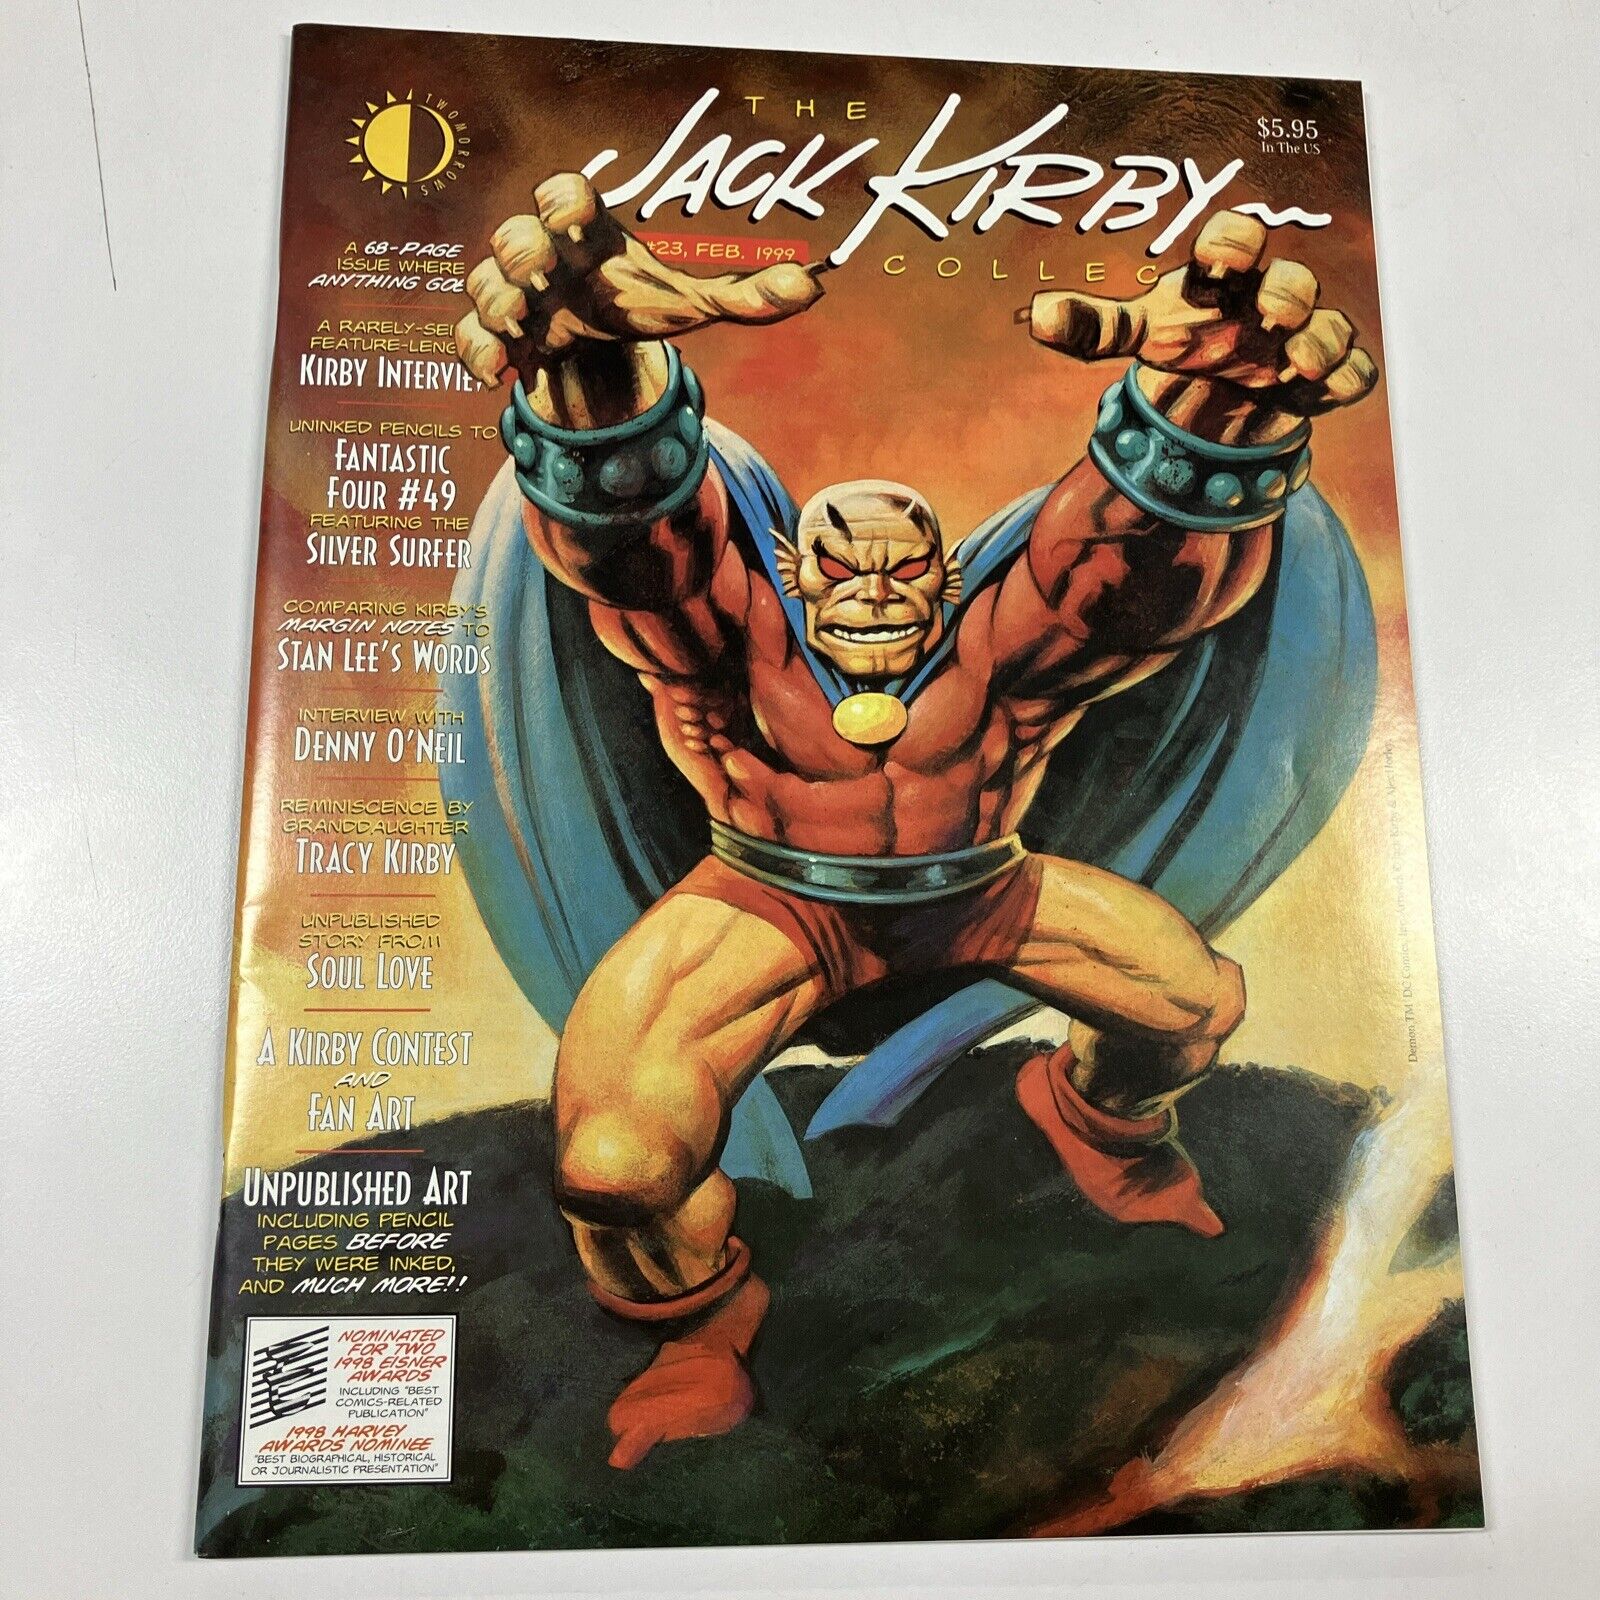 JACK KIRBY COLLECTOR  #23 February 1999 Excellent CLEAN  Condition B\\W MAGAZINE